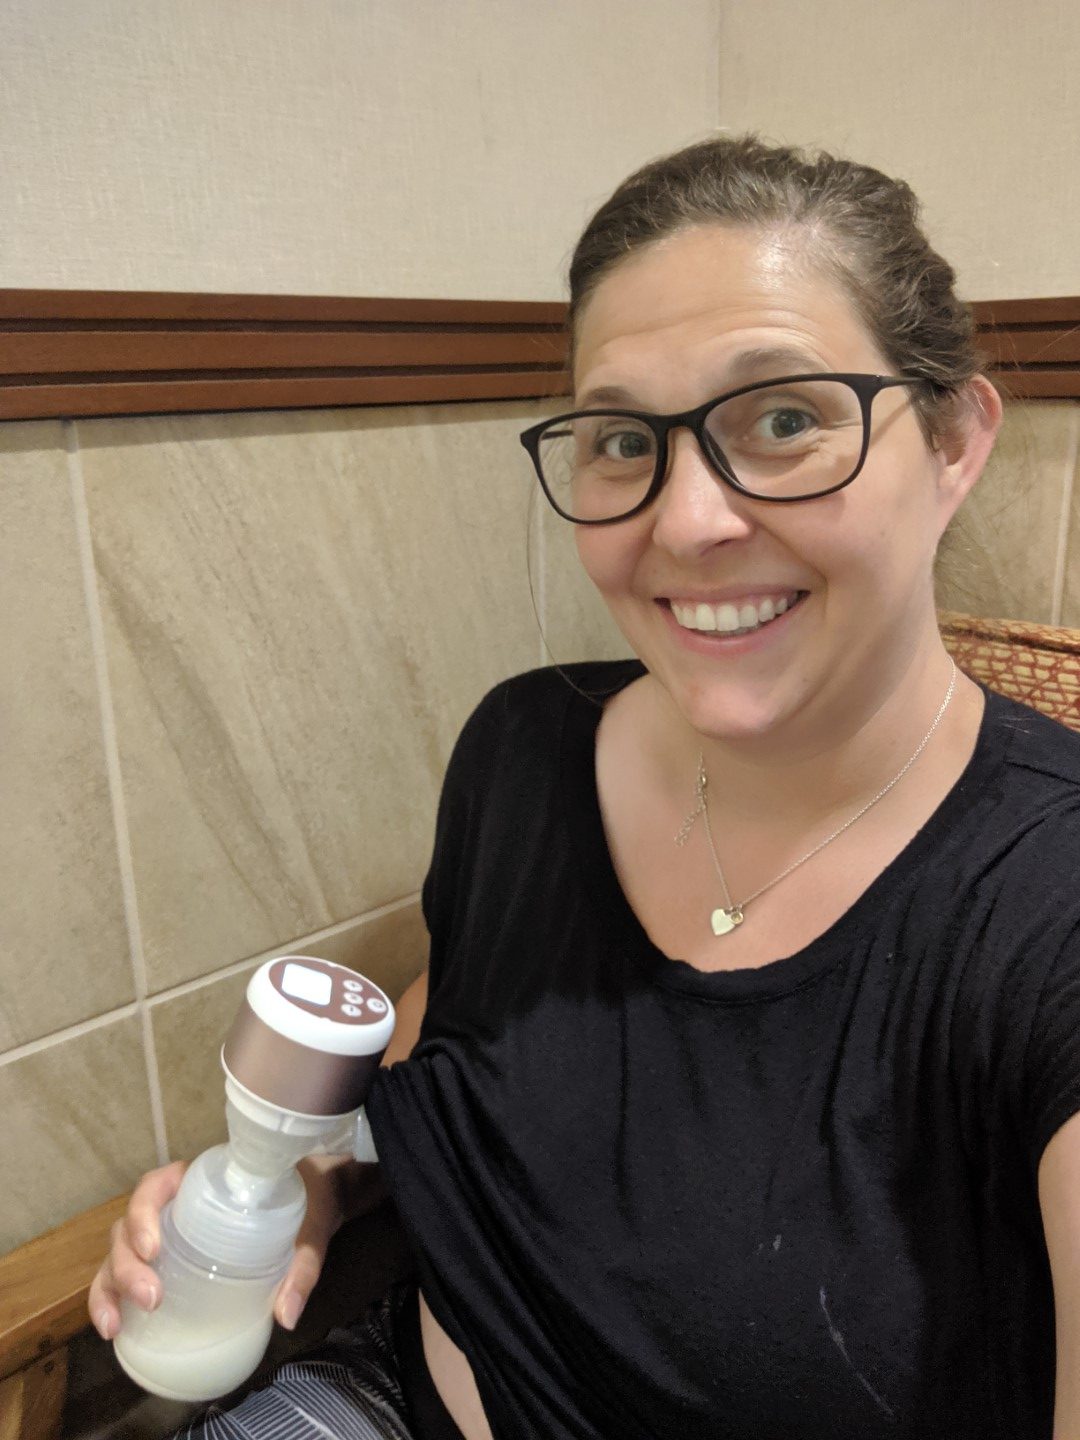 Using a portable Breast pump carry on at the airport